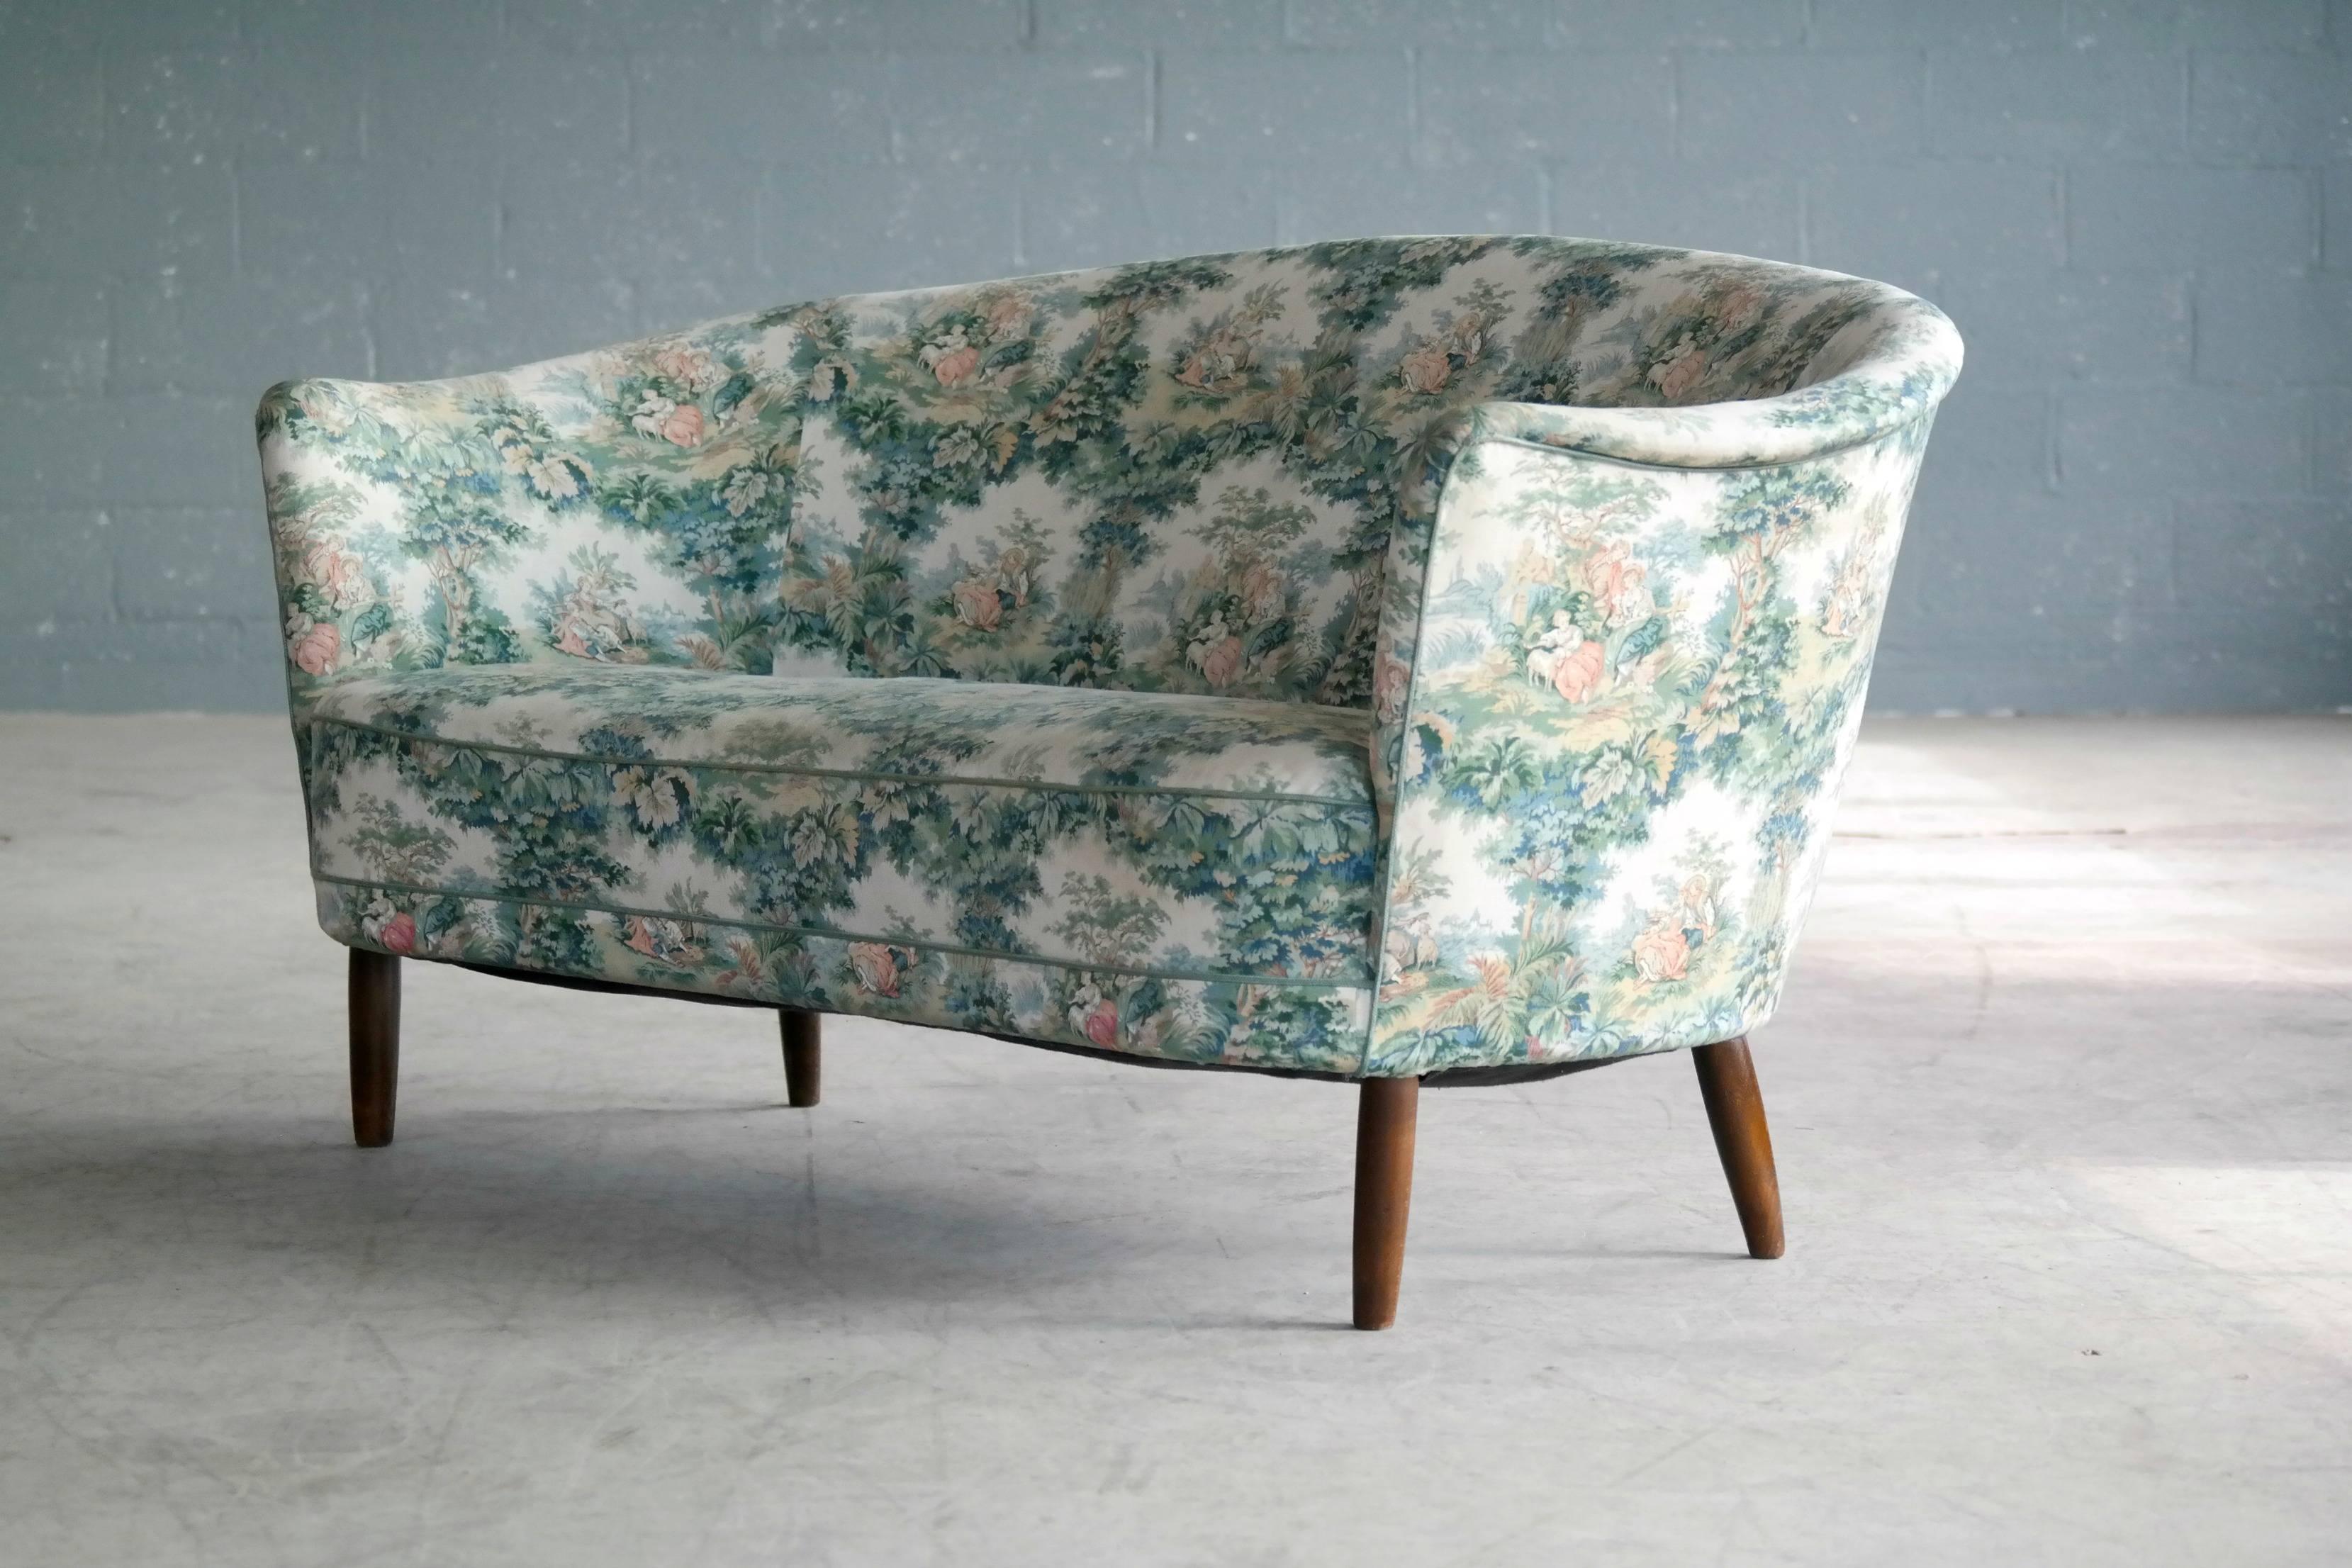 Beautiful and rare Carl Malmsten loveseat or small sofa. Carl Malmsten was a strong proponent of traditional Swedish craftsmanship expressed in very elegant lines and easily recognizable designs exemplified by the rolled-over armrests which is